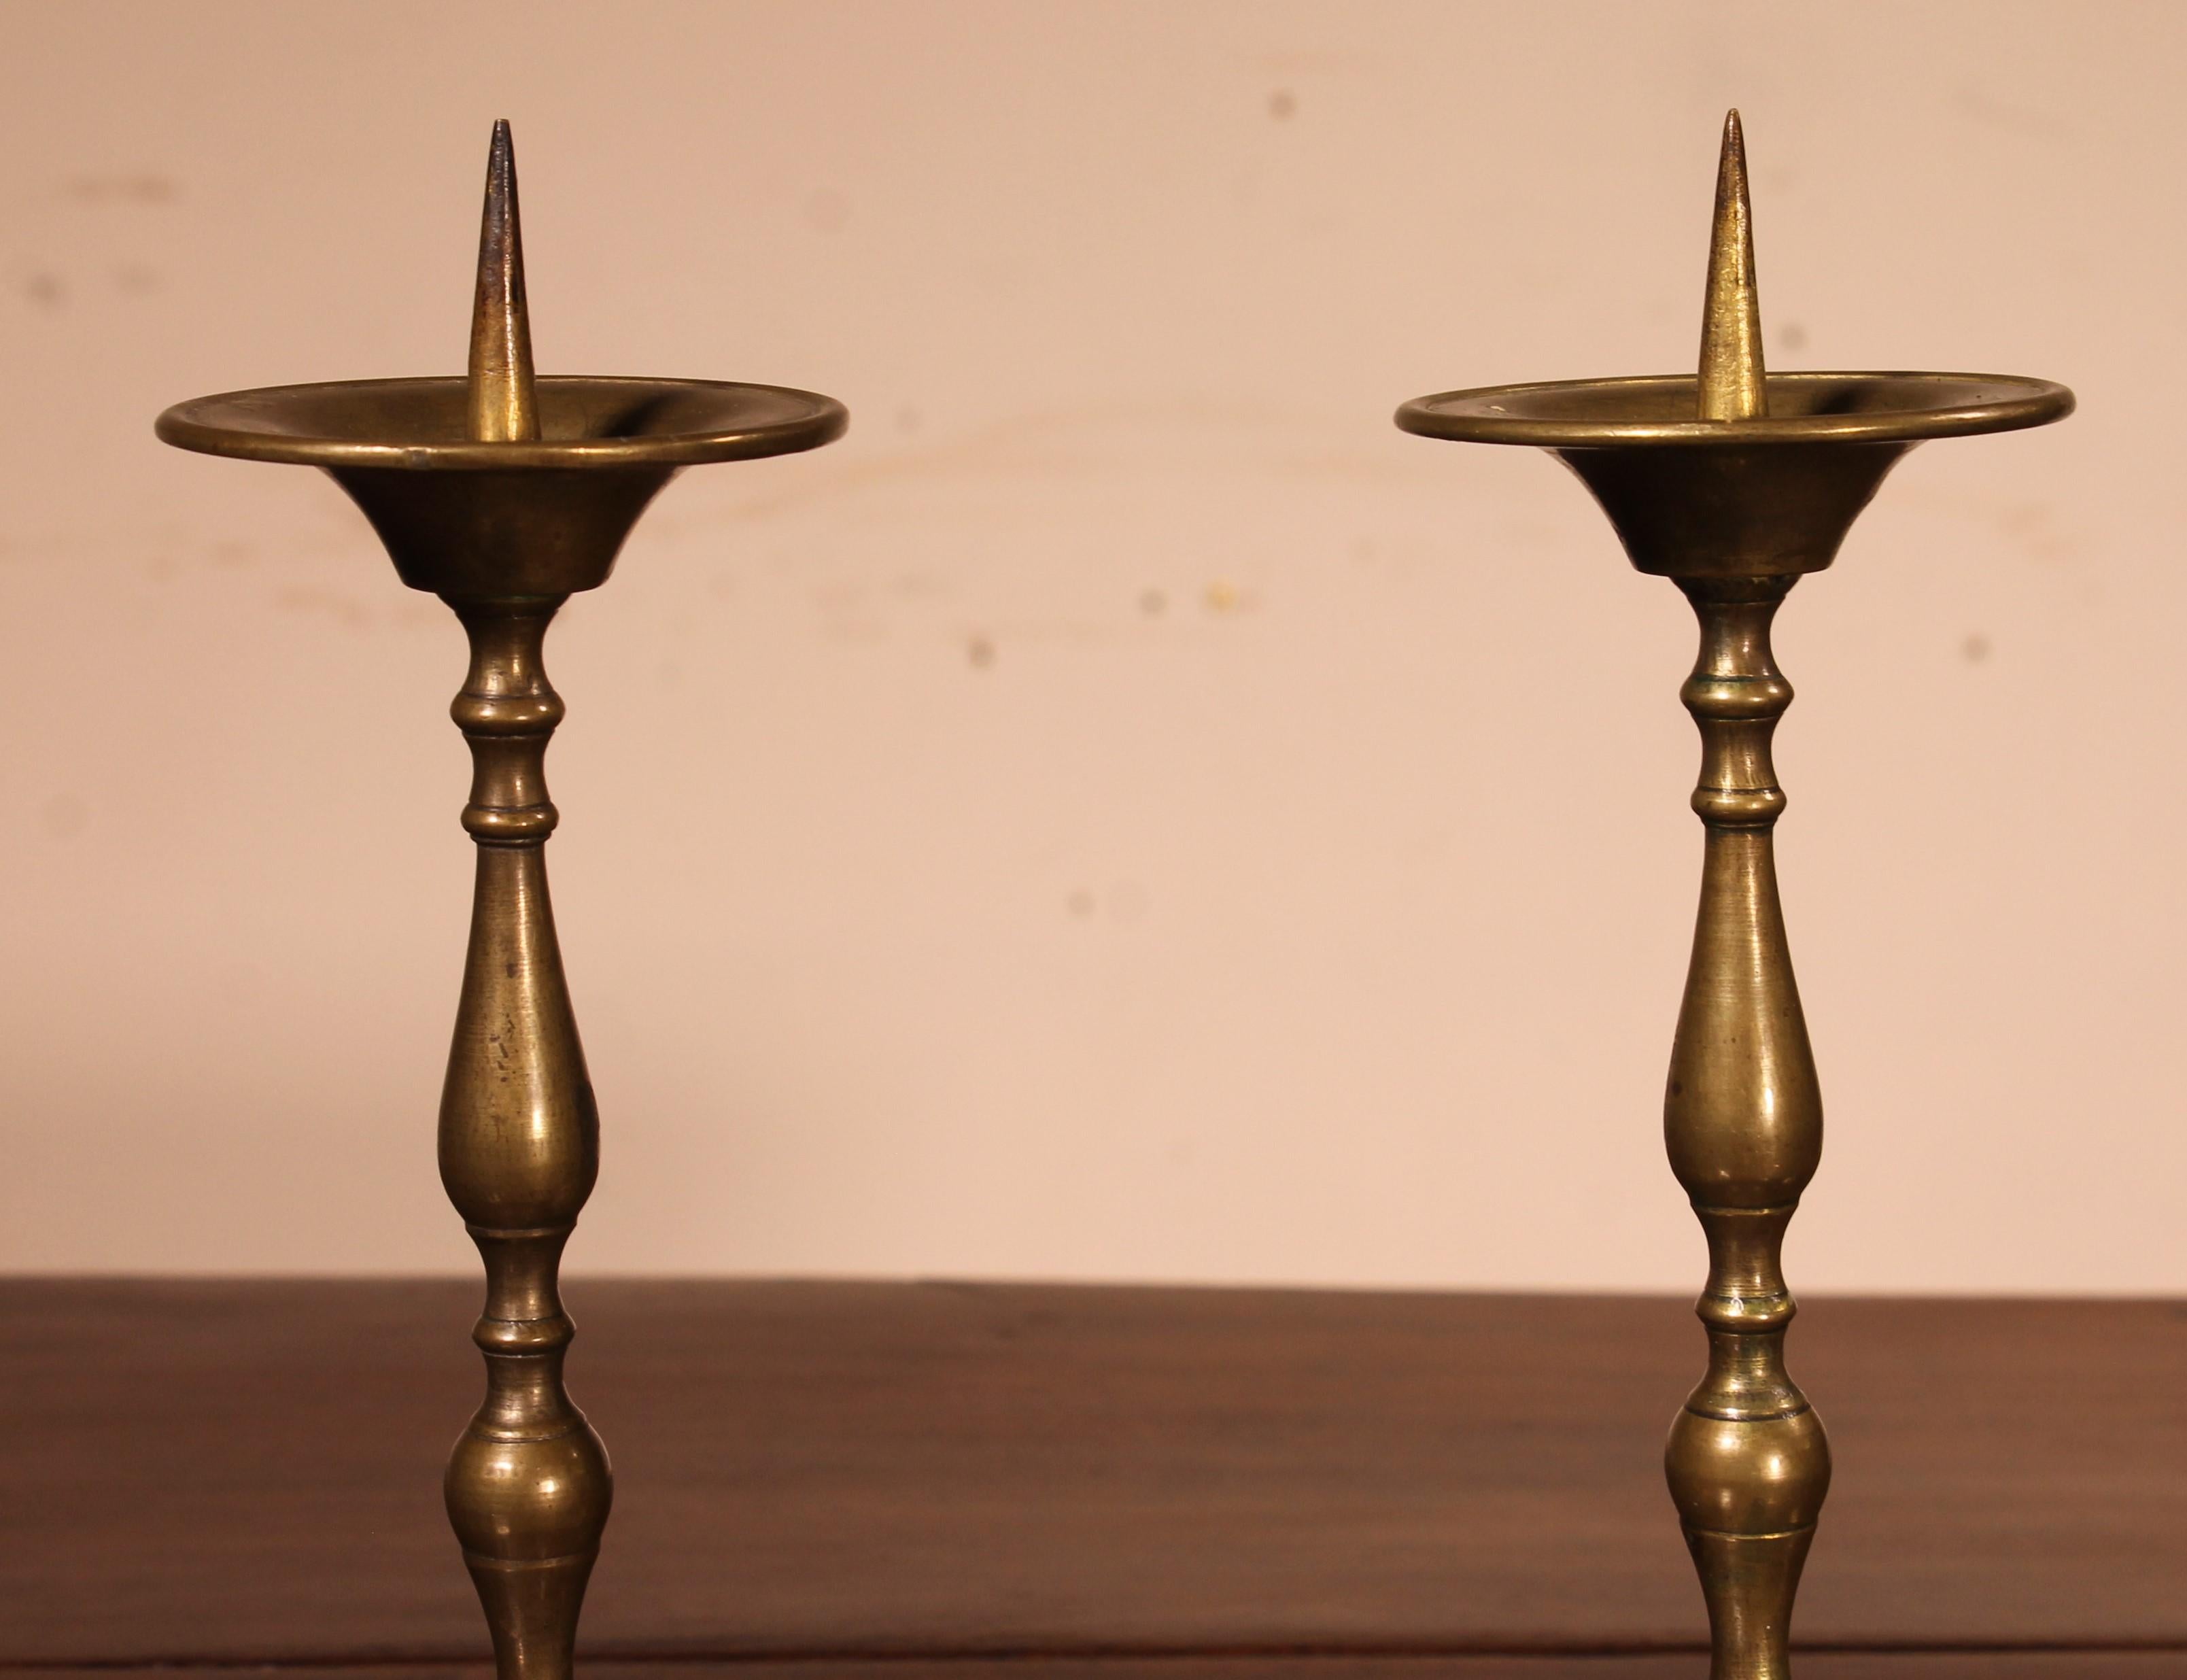 charming little pair of bronze candlesticks which were made in France during the 18th century.

pair of candlesticks which is small in size which is unusual and rare

Superb patina and in magnificent condition with their threads that unscrew.